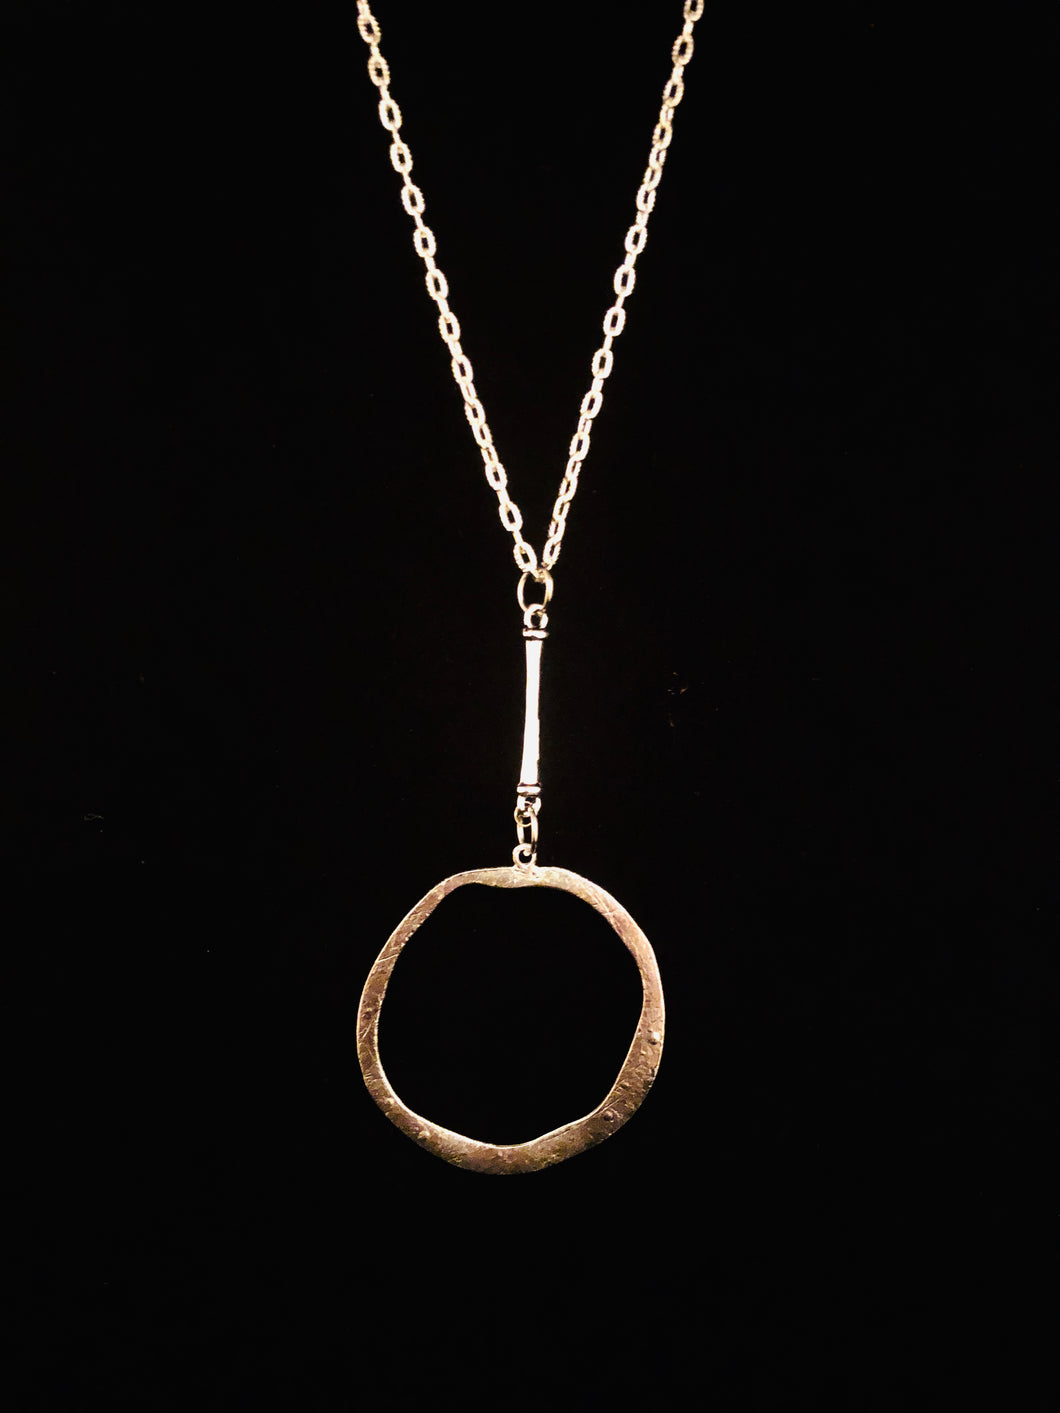 The Elise Necklace